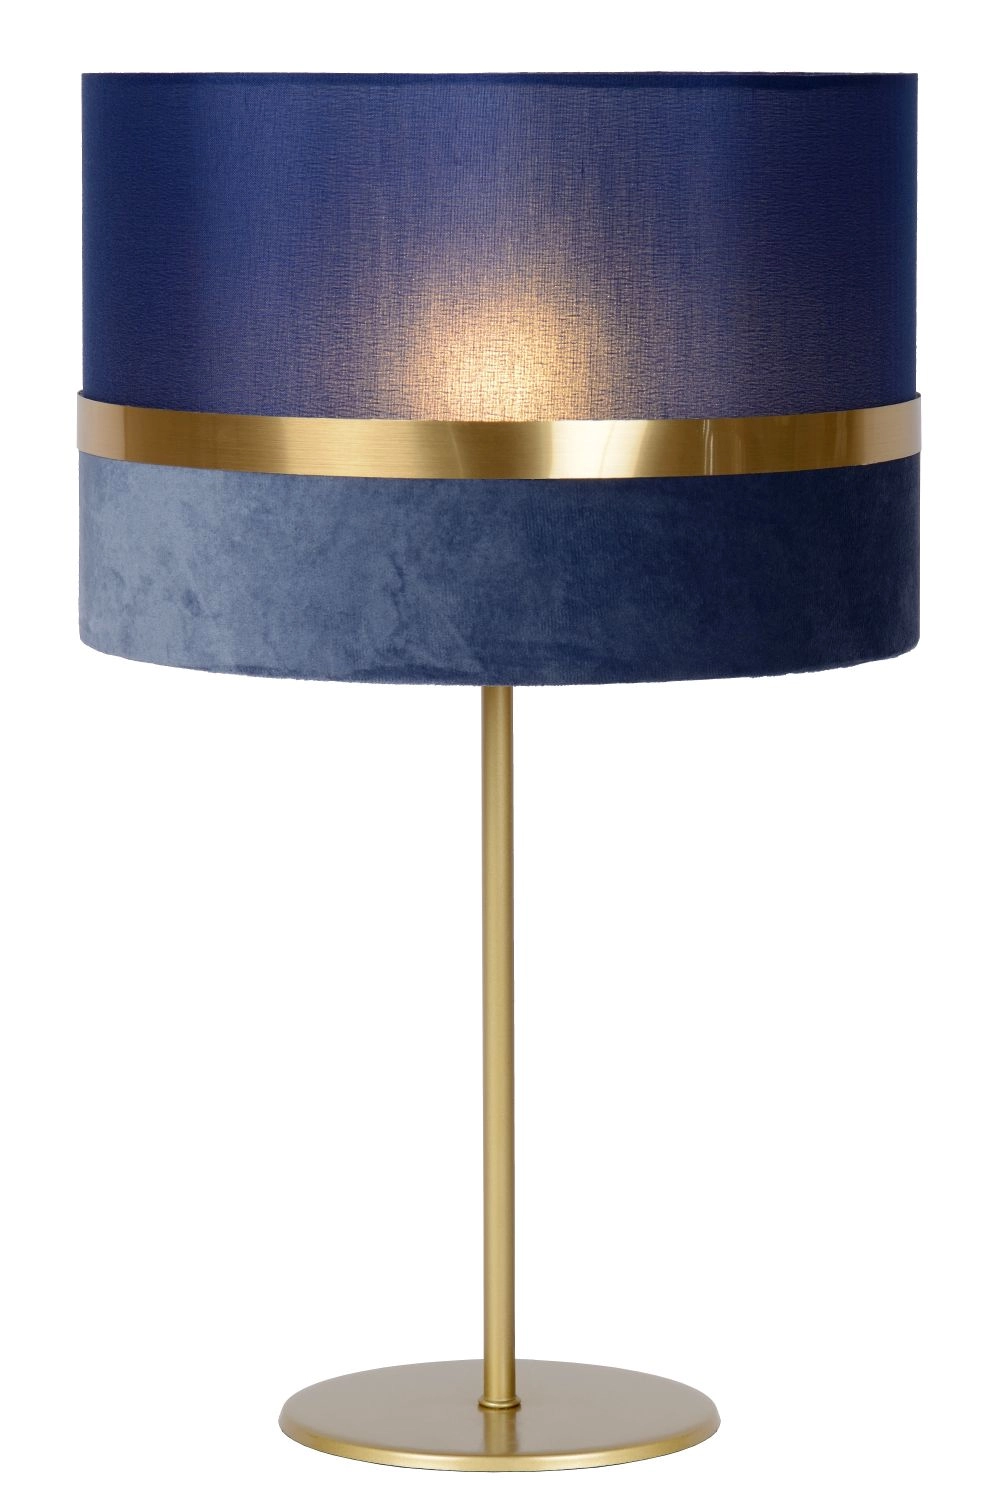 LU 10509/81/35 Lucide EXTRAVAGANZA TUSSE - Table lamp - Ø 30 cm - 1xE14 - Blue